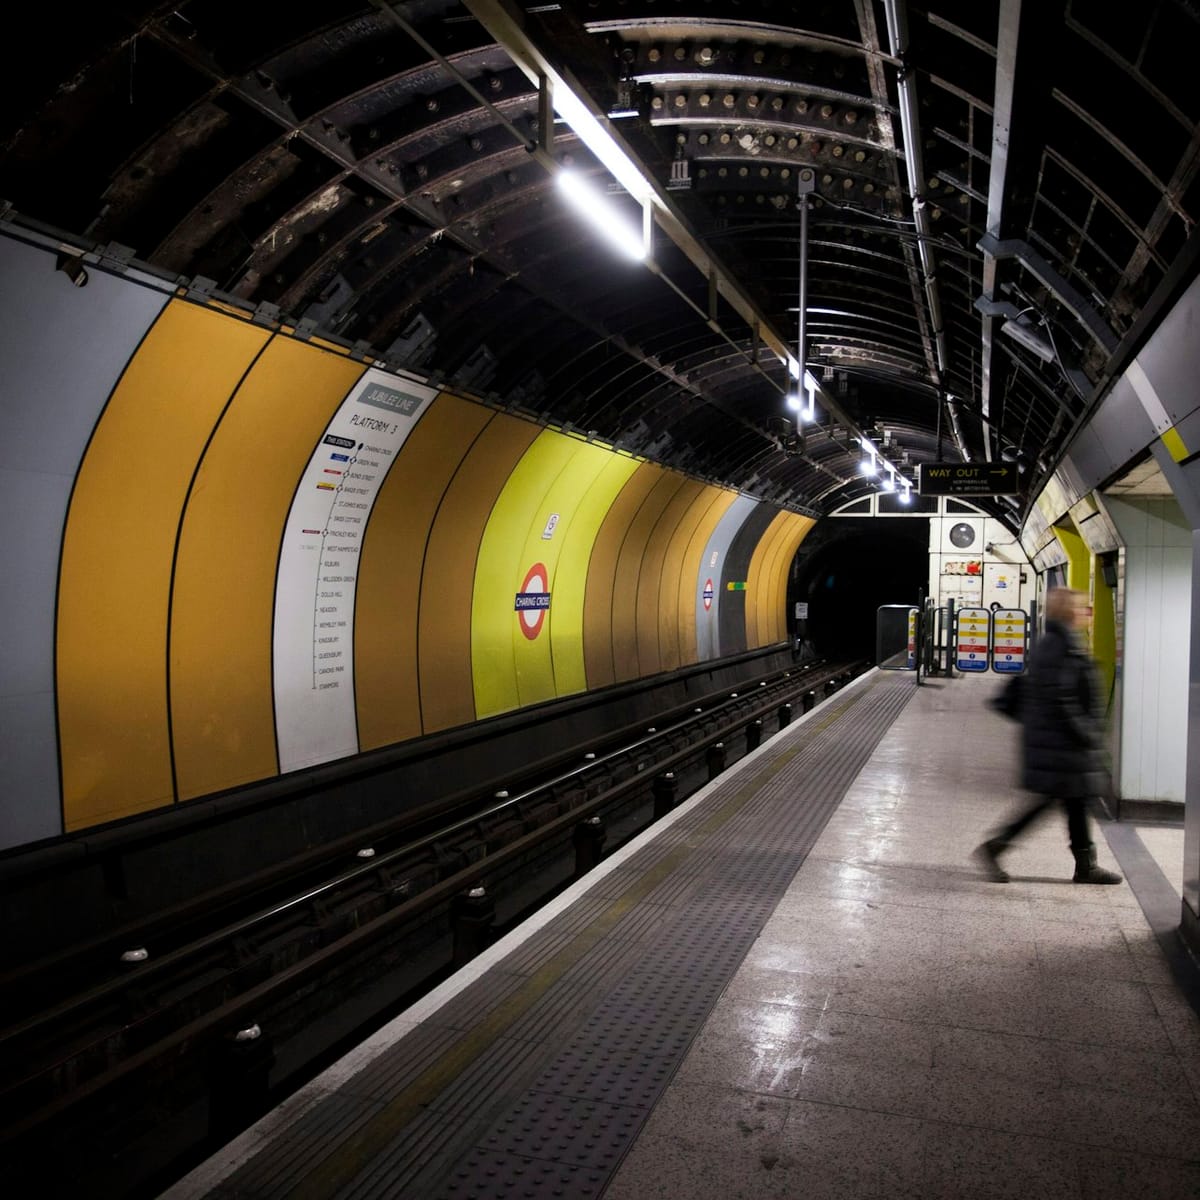 charing-cross-hidden-tube-station-tour-all-areas-access_1